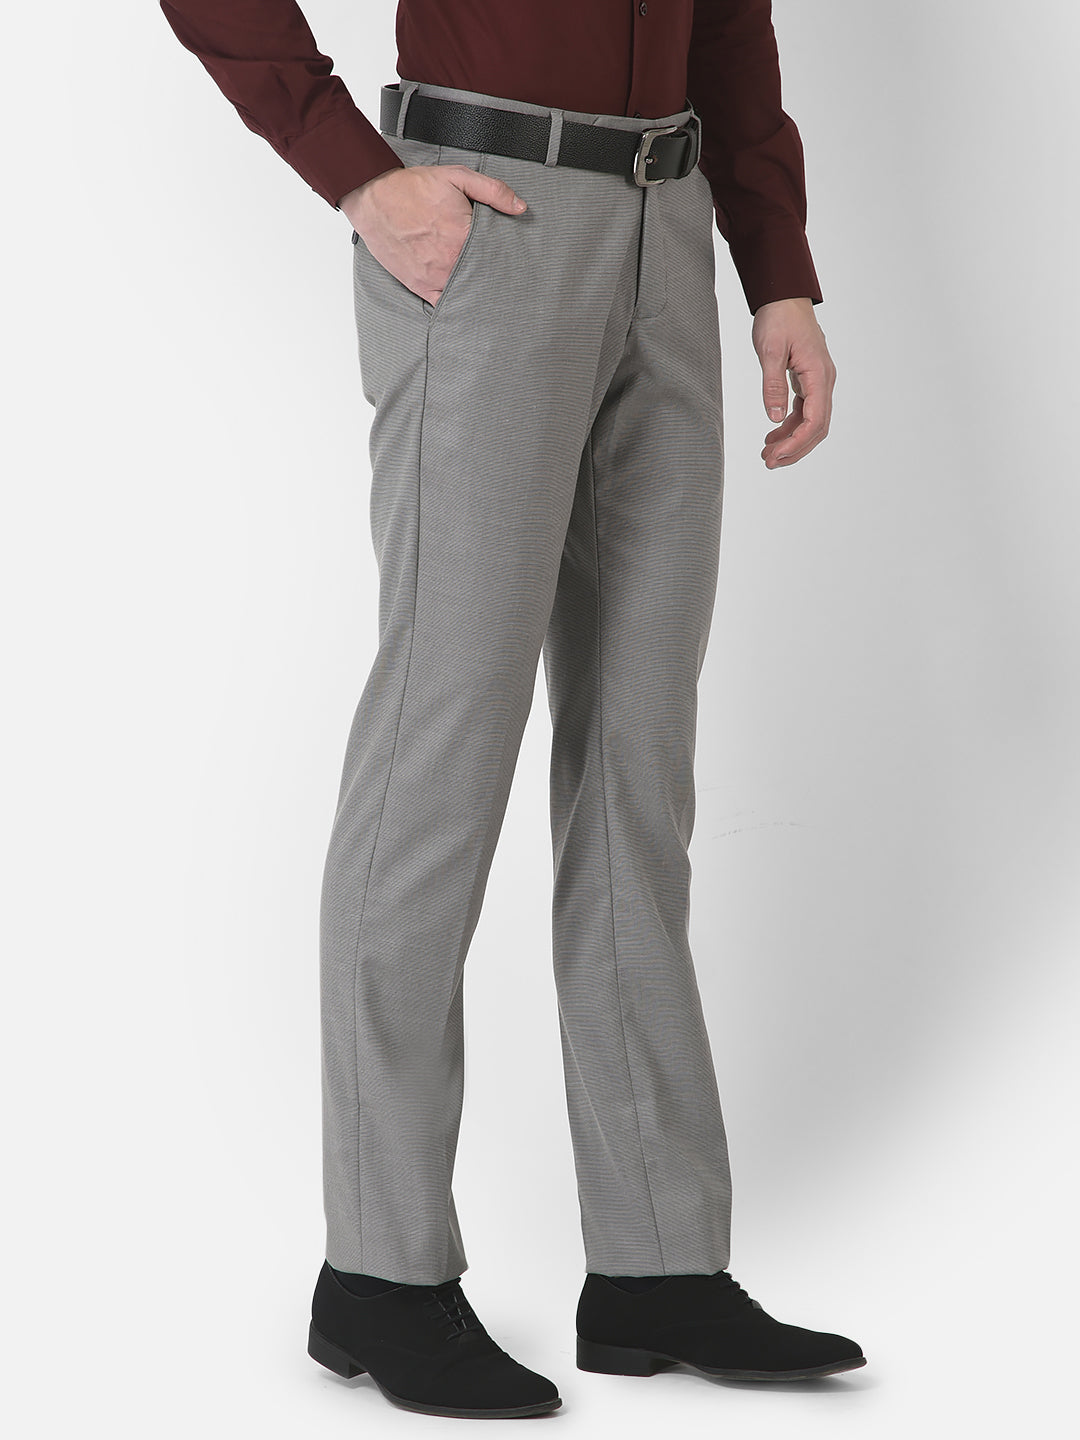 The Perfect Fitting Plain Coffee Brown Corduroy Trouser